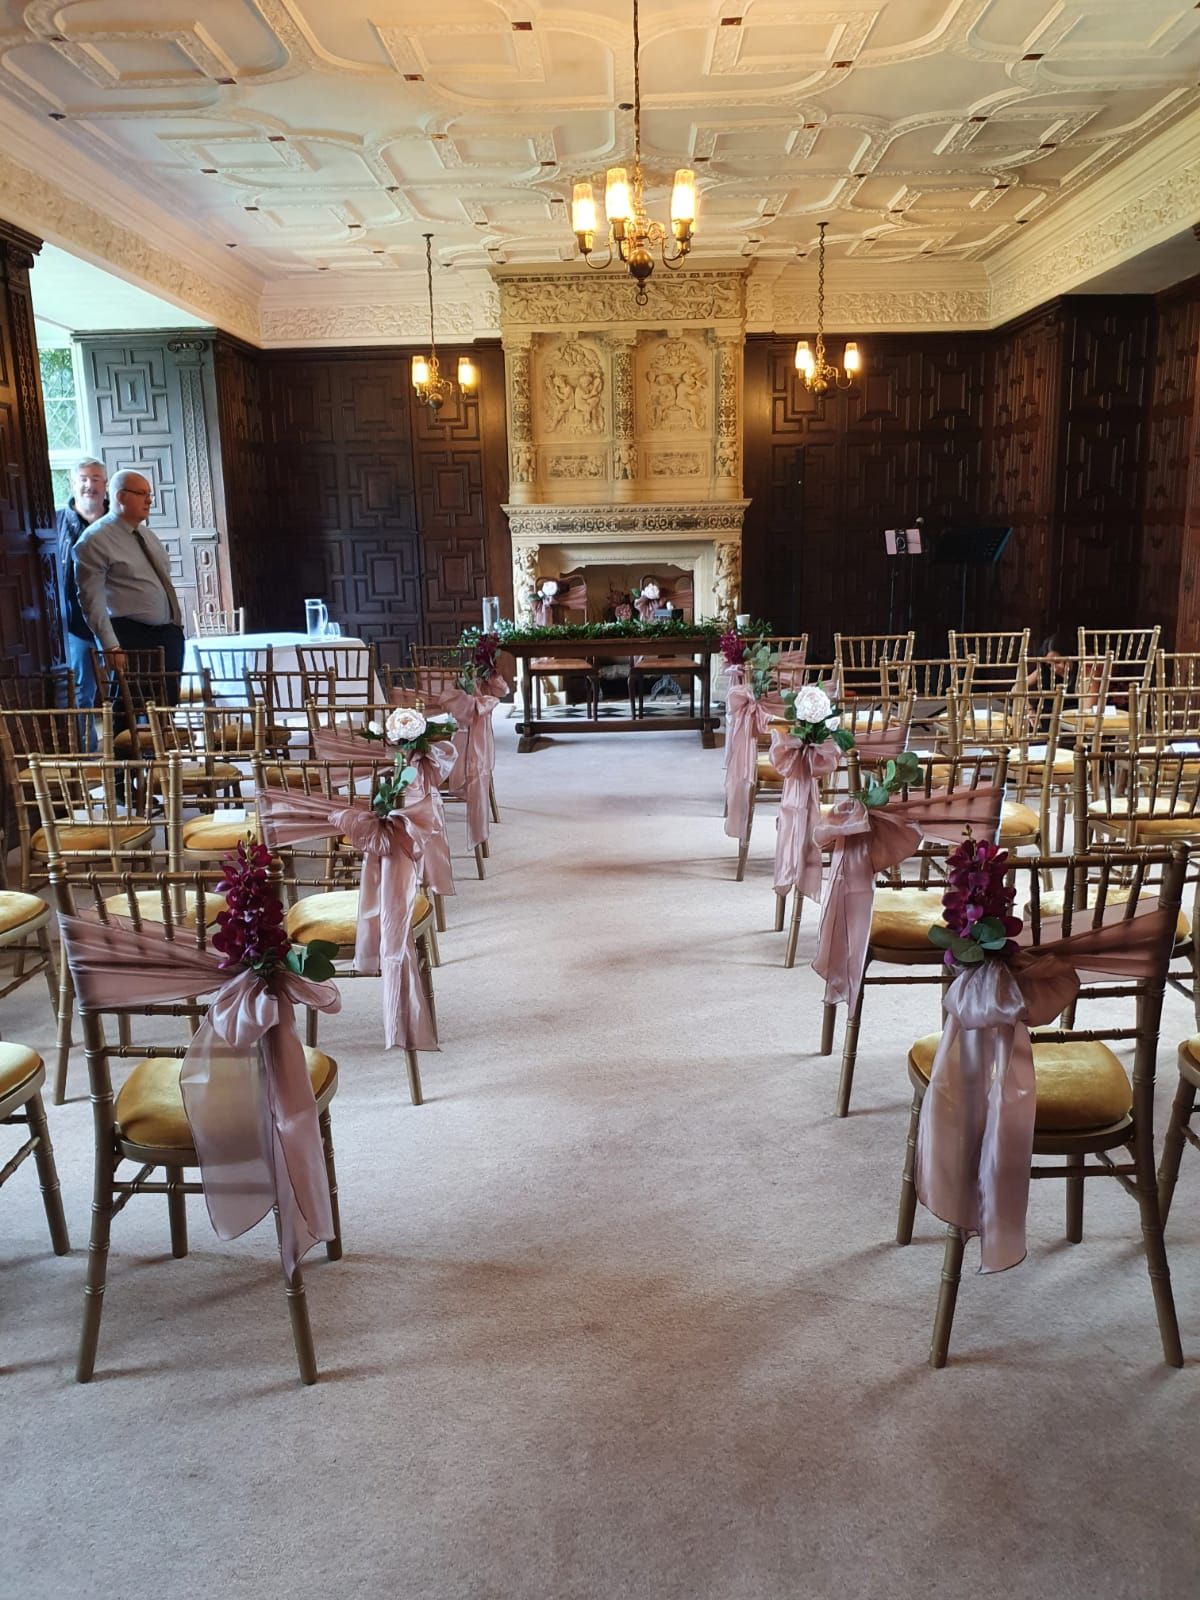 Rothamsted Manor Library - showing the exquisite fireplace originating from 1622  - a perfect backdrop for a wedding ceremony